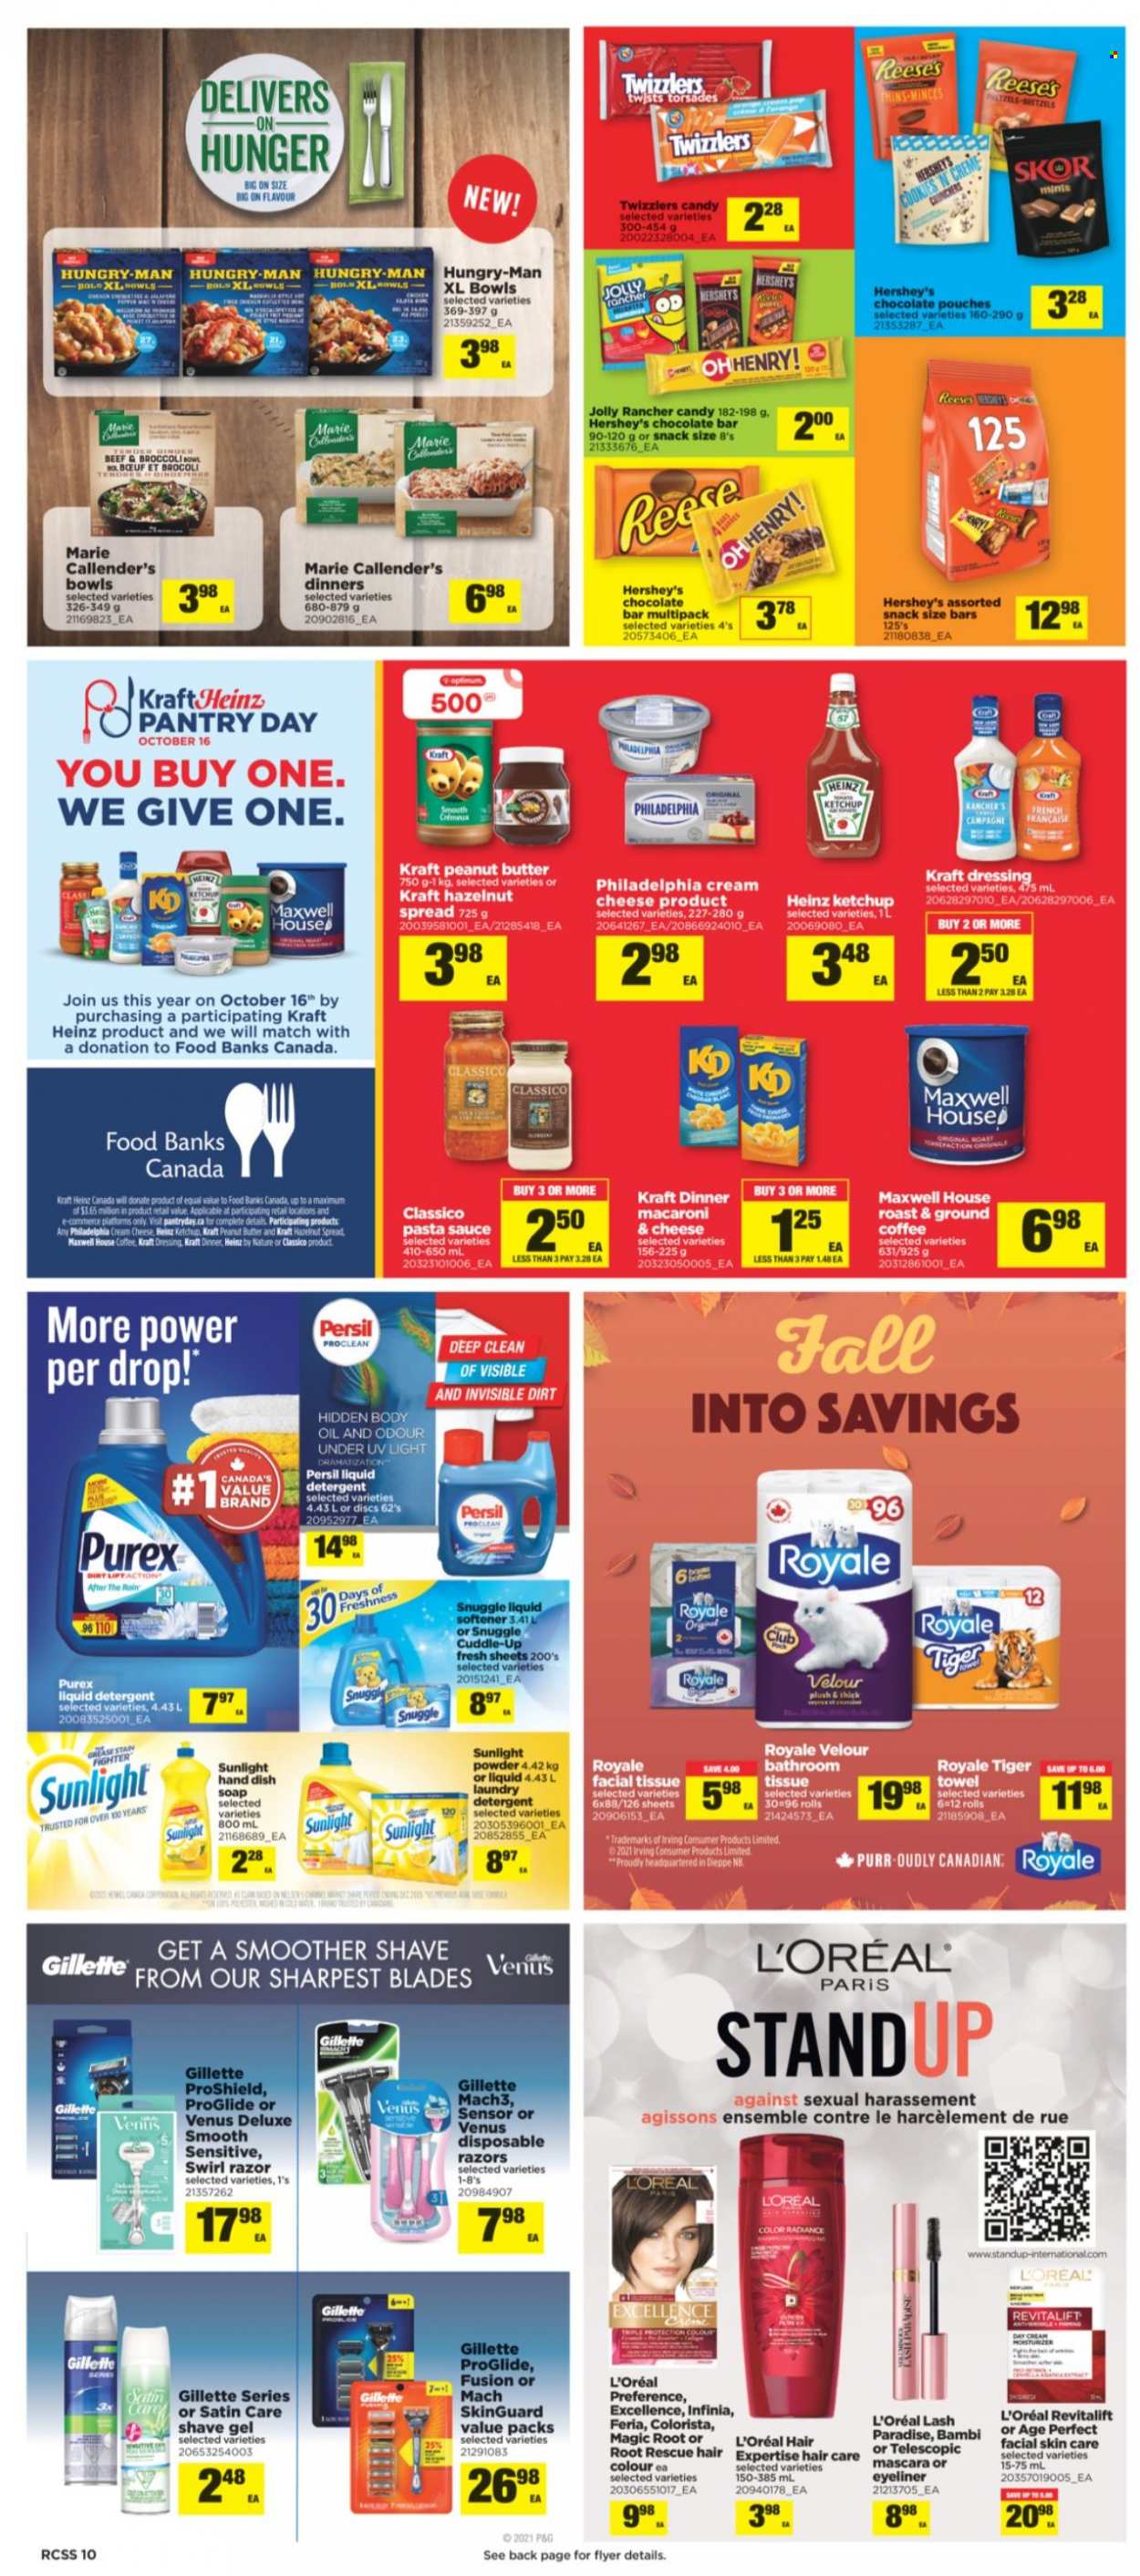 thumbnail - Real Canadian Superstore Flyer - October 14, 2021 - October 20, 2021 - Sales products - broccoli, corn, macaroni & cheese, pasta sauce, sauce, Marie Callender's, Kraft®, cream cheese, Reese's, Hershey's, cookies, chocolate bar, Thins, Heinz, dressing, Classico, peanut butter, hazelnut spread, Maxwell House, coffee, ground coffee, L'Or, bath tissue, Snuggle, Persil, fabric softener, liquid detergent, laundry detergent, Sunlight, Purex, soap, day cream, L’Oréal, body oil, razor, shave gel, Venus, mascara, eyeliner, towel, Optimum, detergent, Gillette, ketchup, Philadelphia. Page 10.